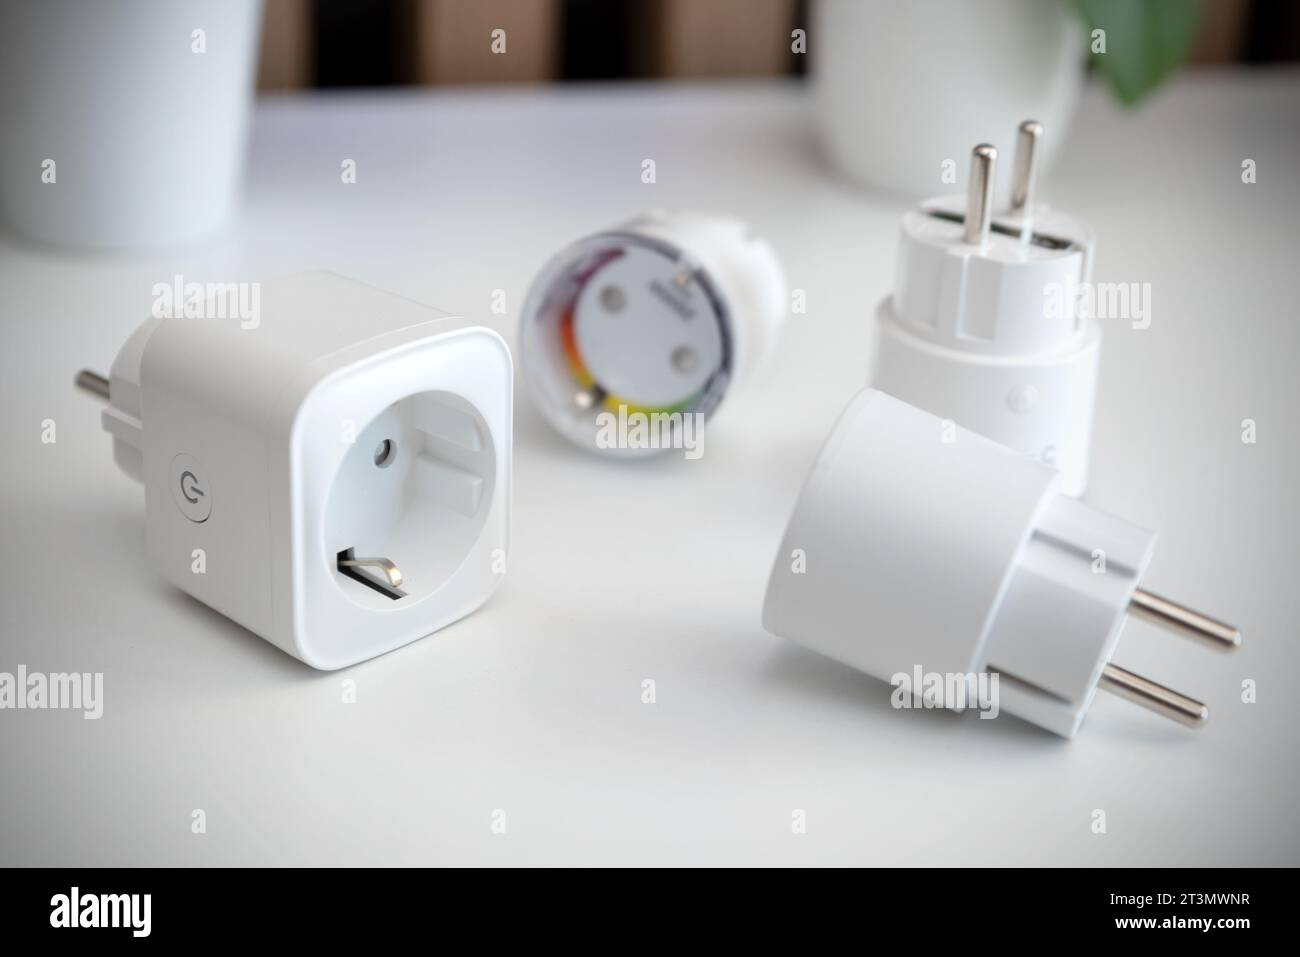 Using Wi-fi smart sockets in a smart home, controlling electricity consumption Stock Photo